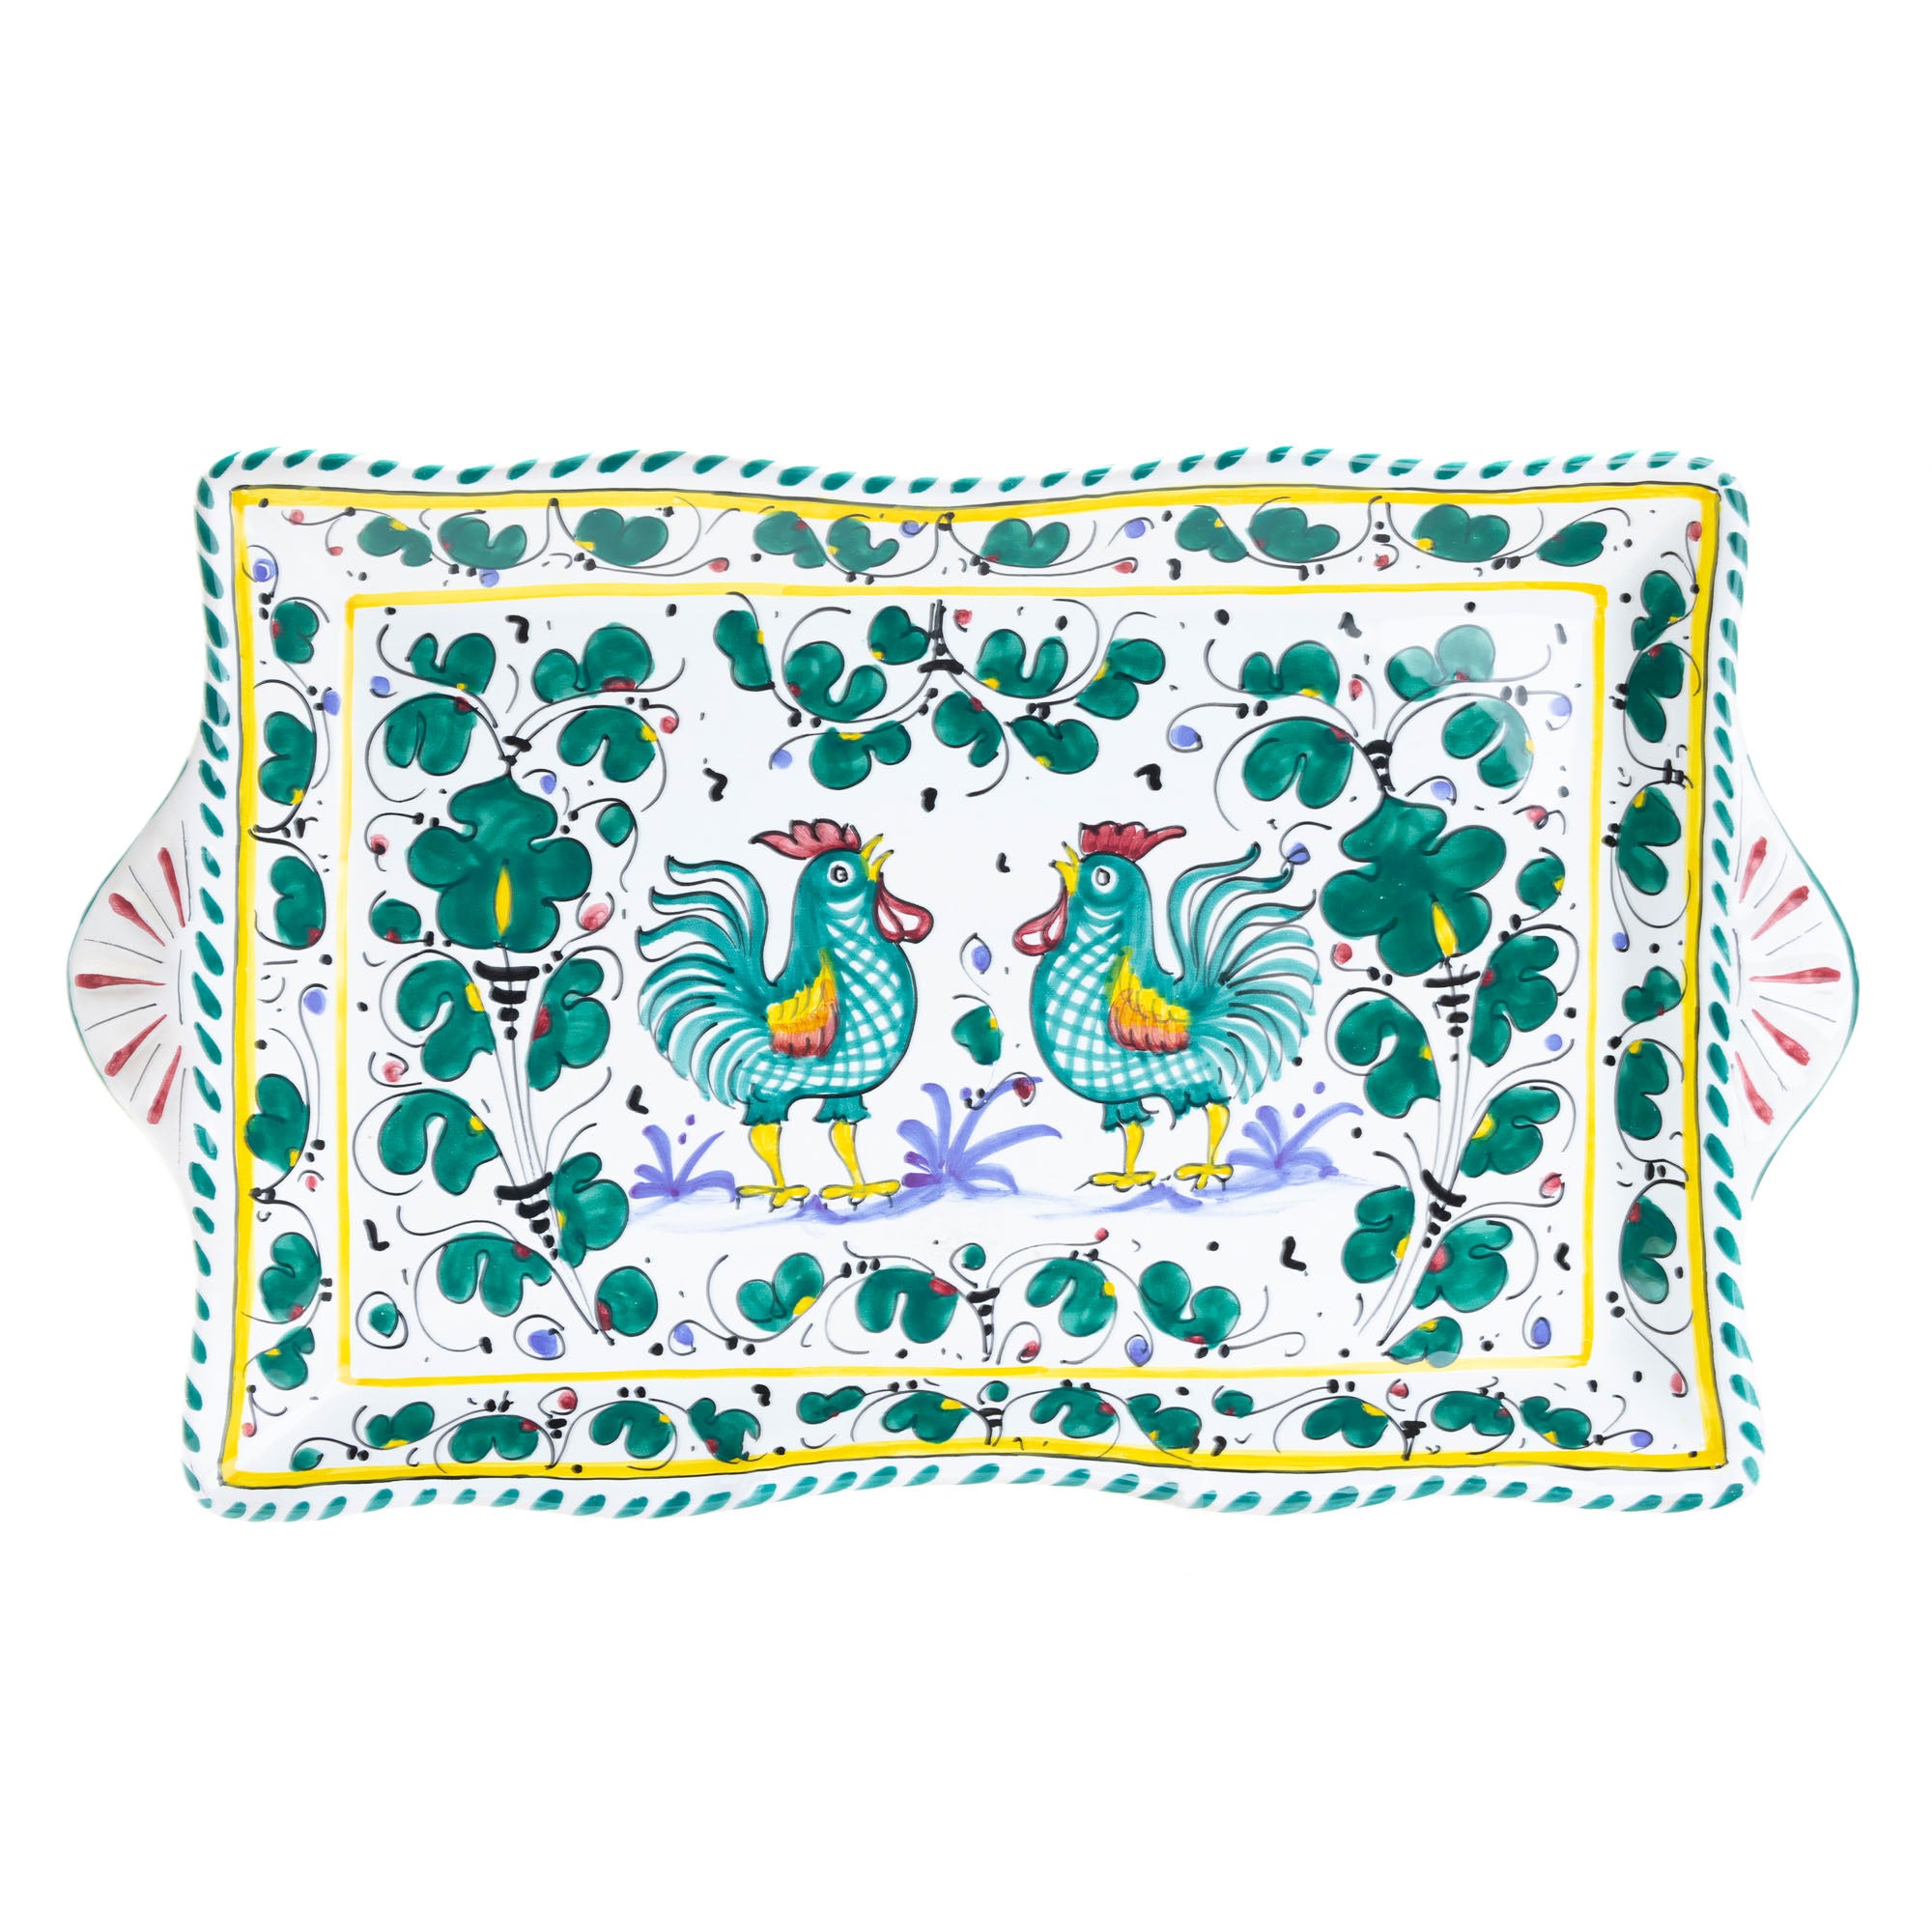 Orvieto Rectangular Tray, ceramics, pottery, italian design, majolica, handmade, handcrafted, handpainted, home decor, kitchen art, home goods, deruta, majolica, Artisan, treasures, traditional art, modern art, gift ideas, style, SF, shop small business, artists, shop online, landmark store, legacy, one of a kind, limited edition, gift guide, gift shop, retail shop, decorations, shopping, italy, home staging, home decorating, home interiors